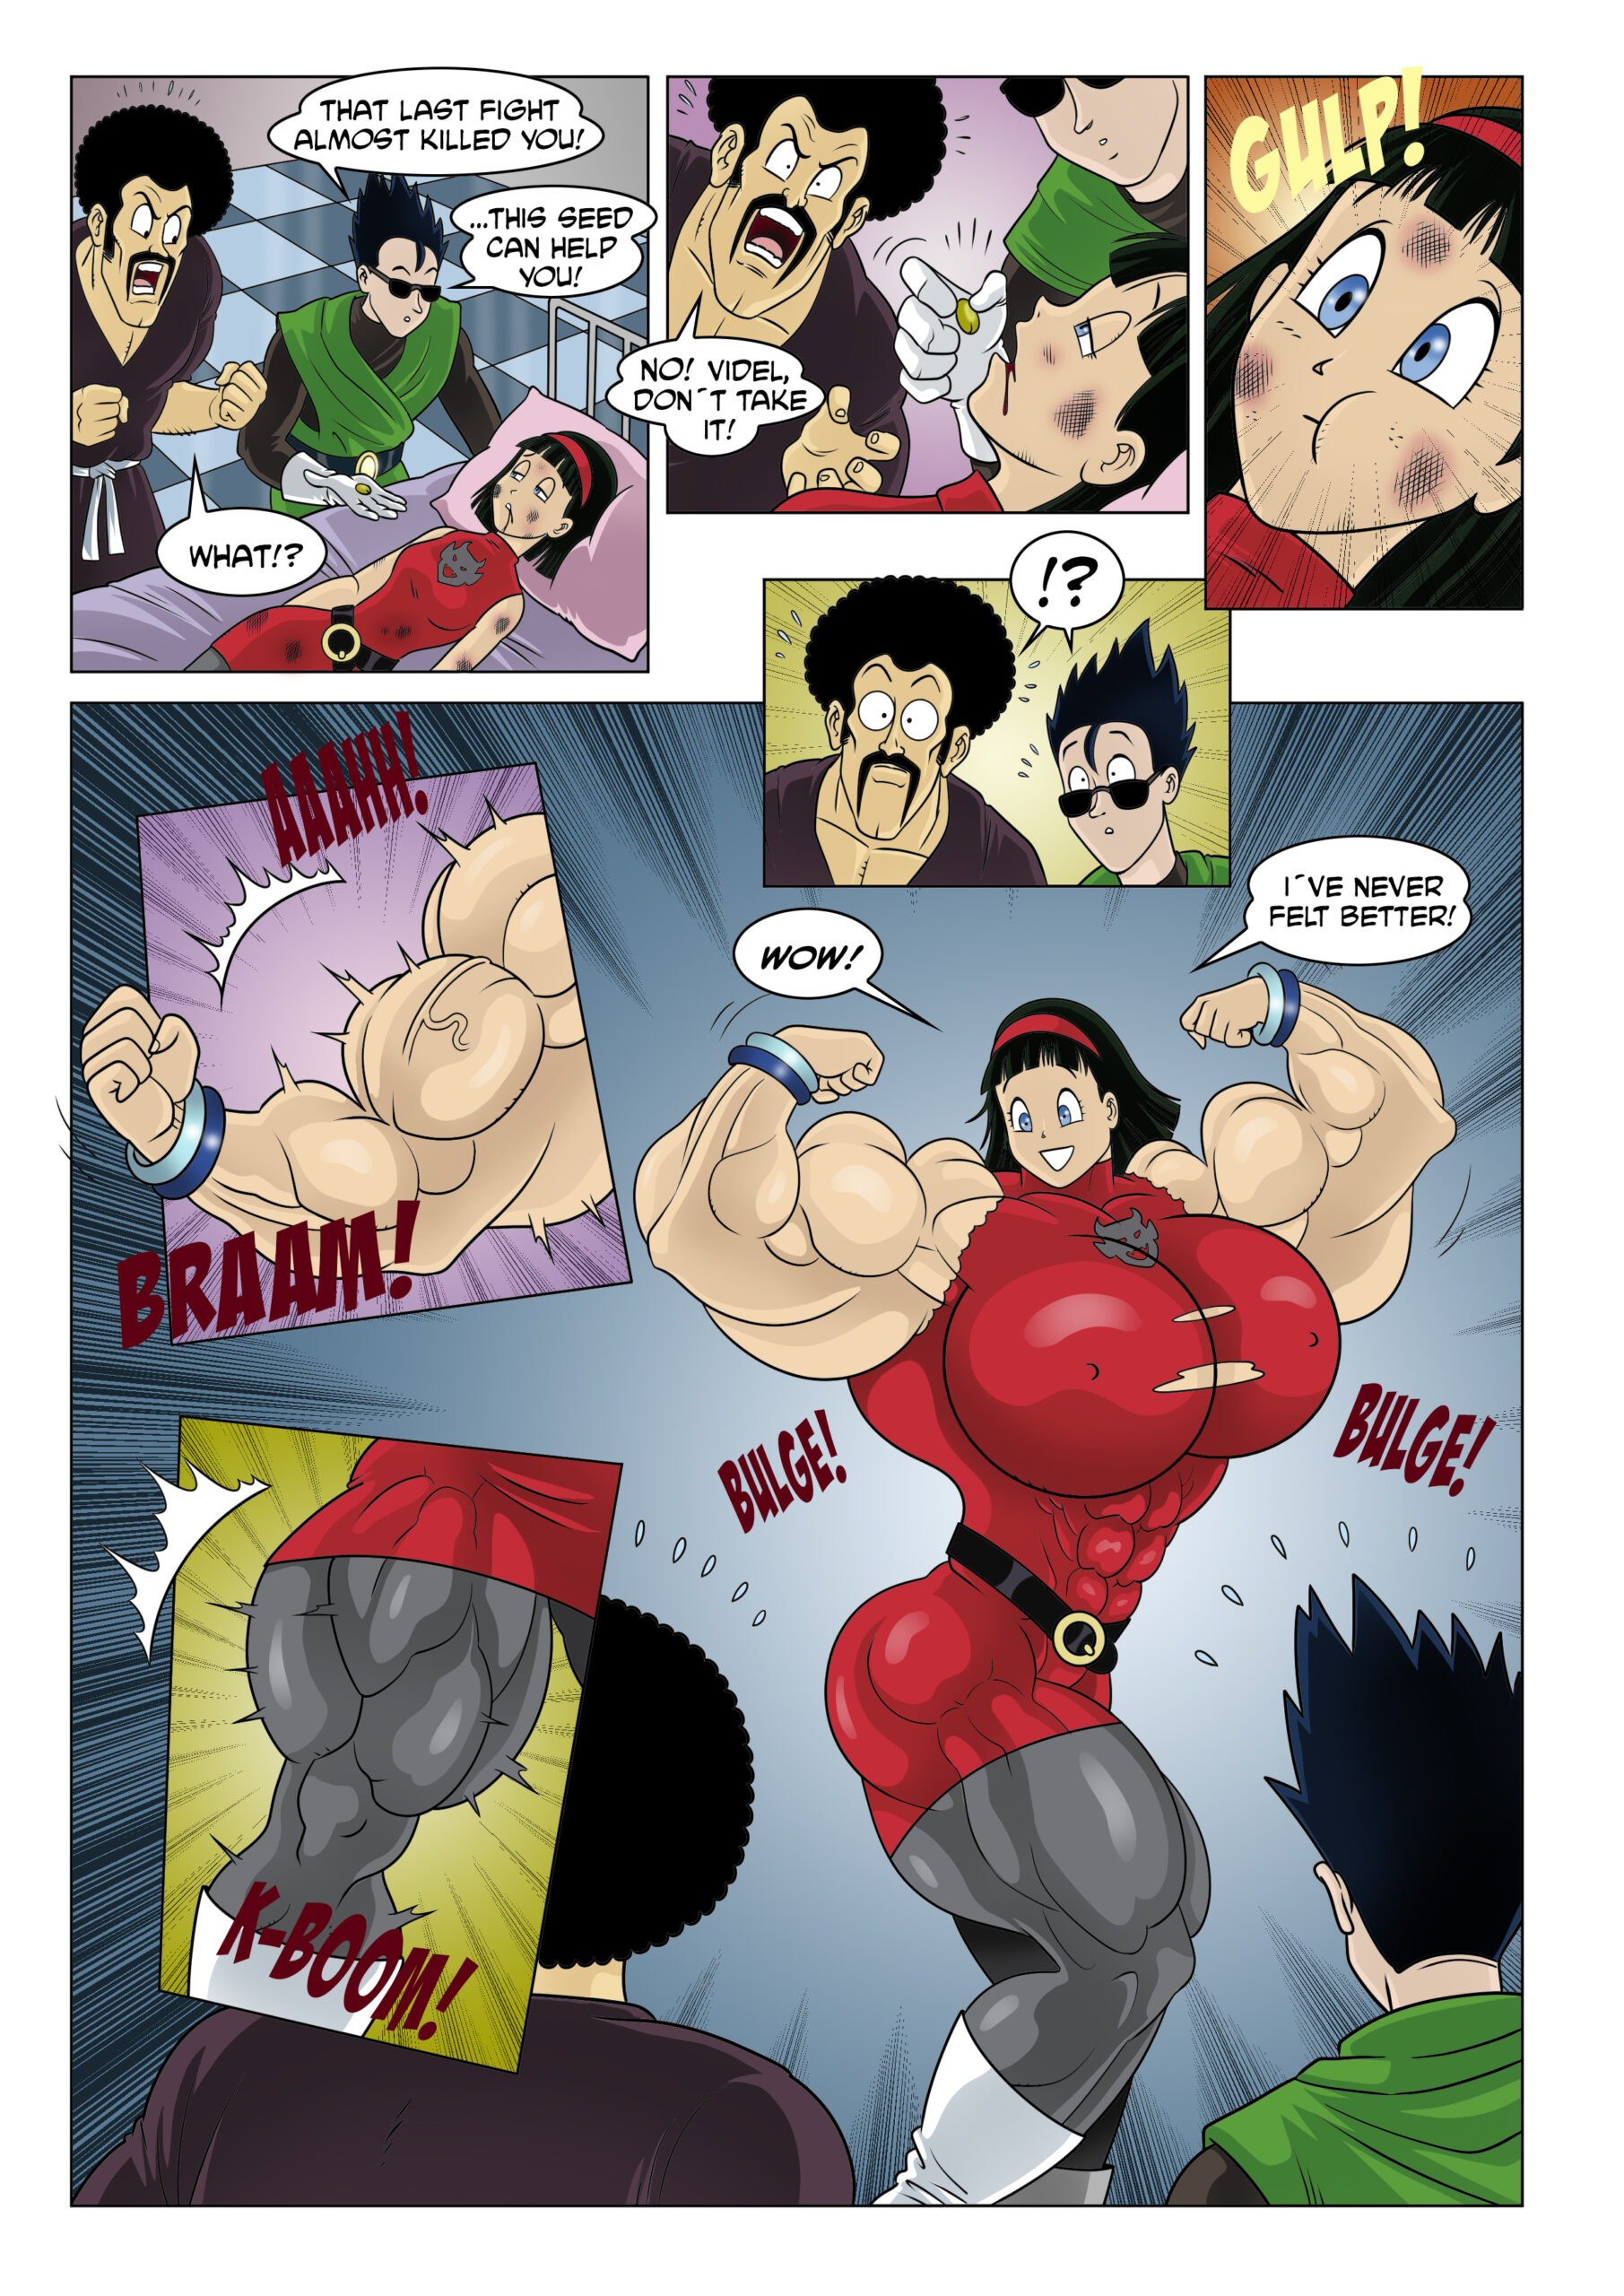 videl female muscle growth